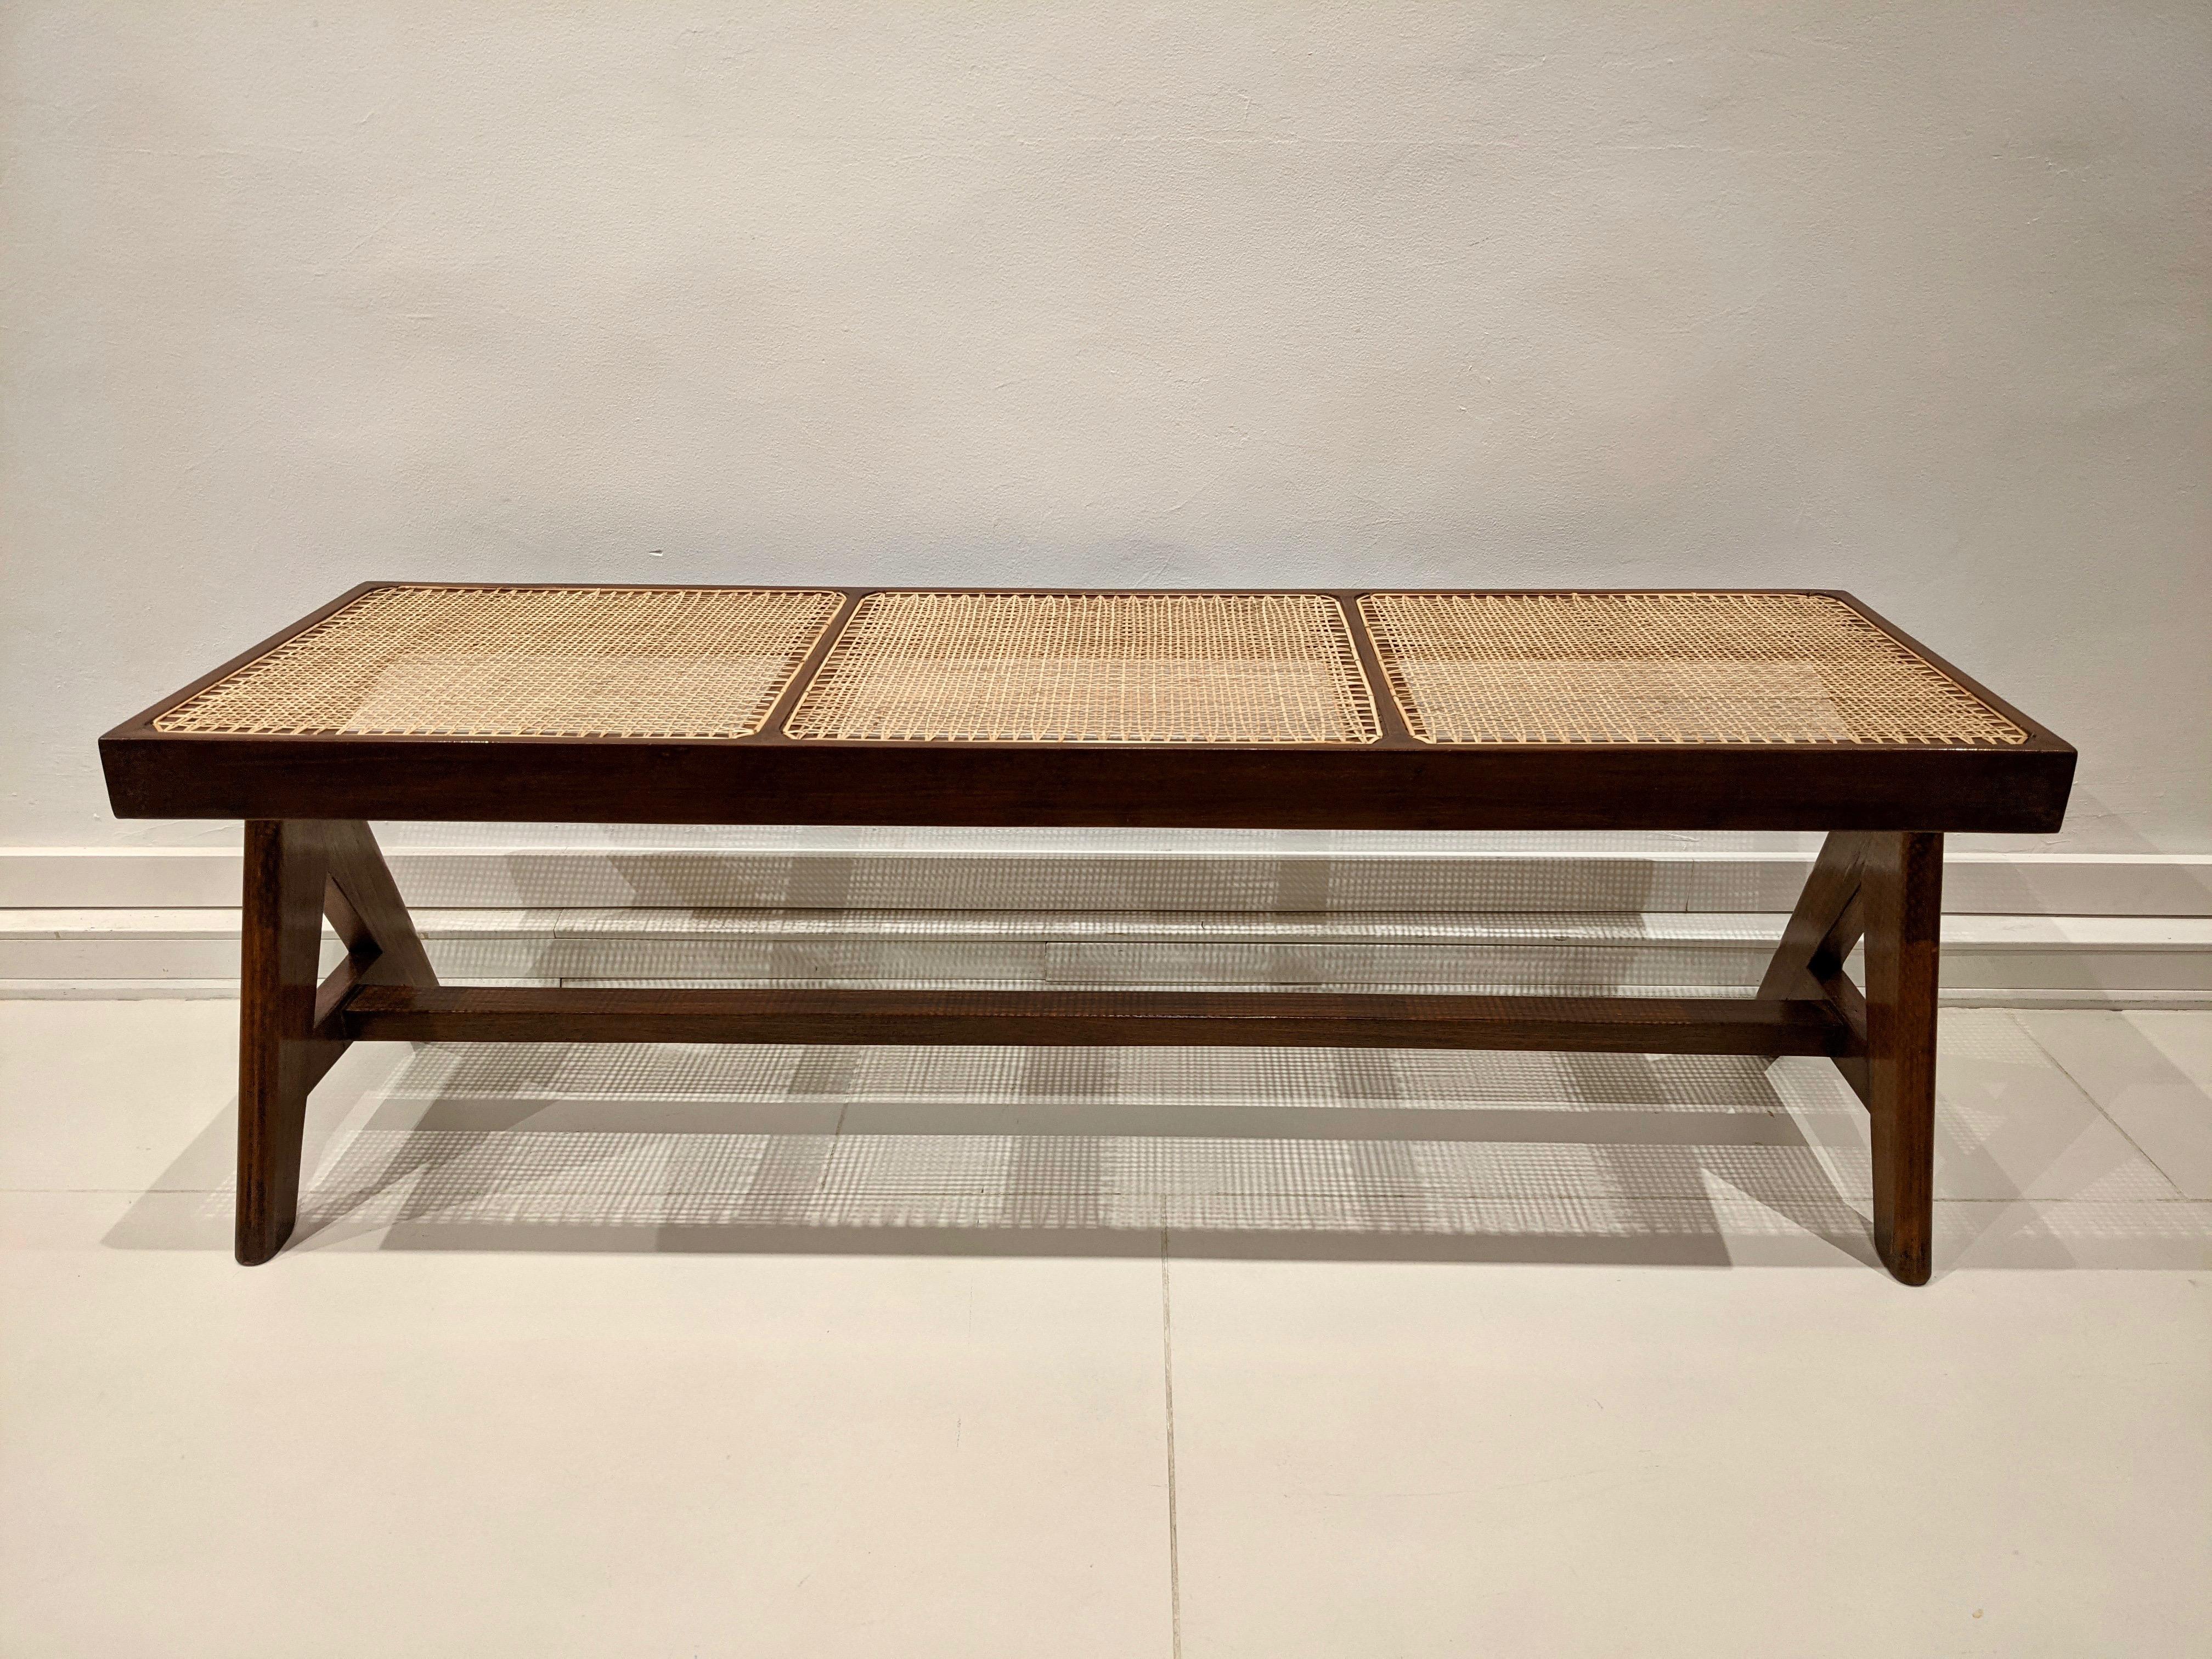 Bench in solid teak and cane by Pierre Jeanneret. Very good condition. Restoration of the wood. Circa 1956.